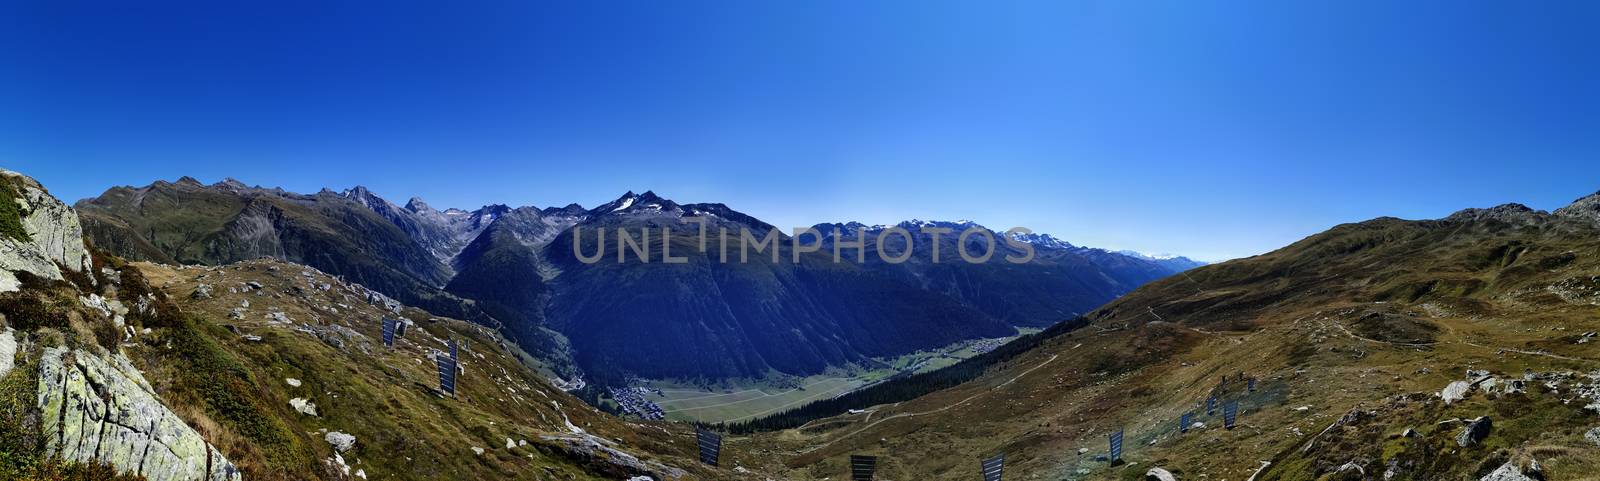 panorama scenery of the swiss alps. Lake at the top of grimsel p by PeterHofstetter